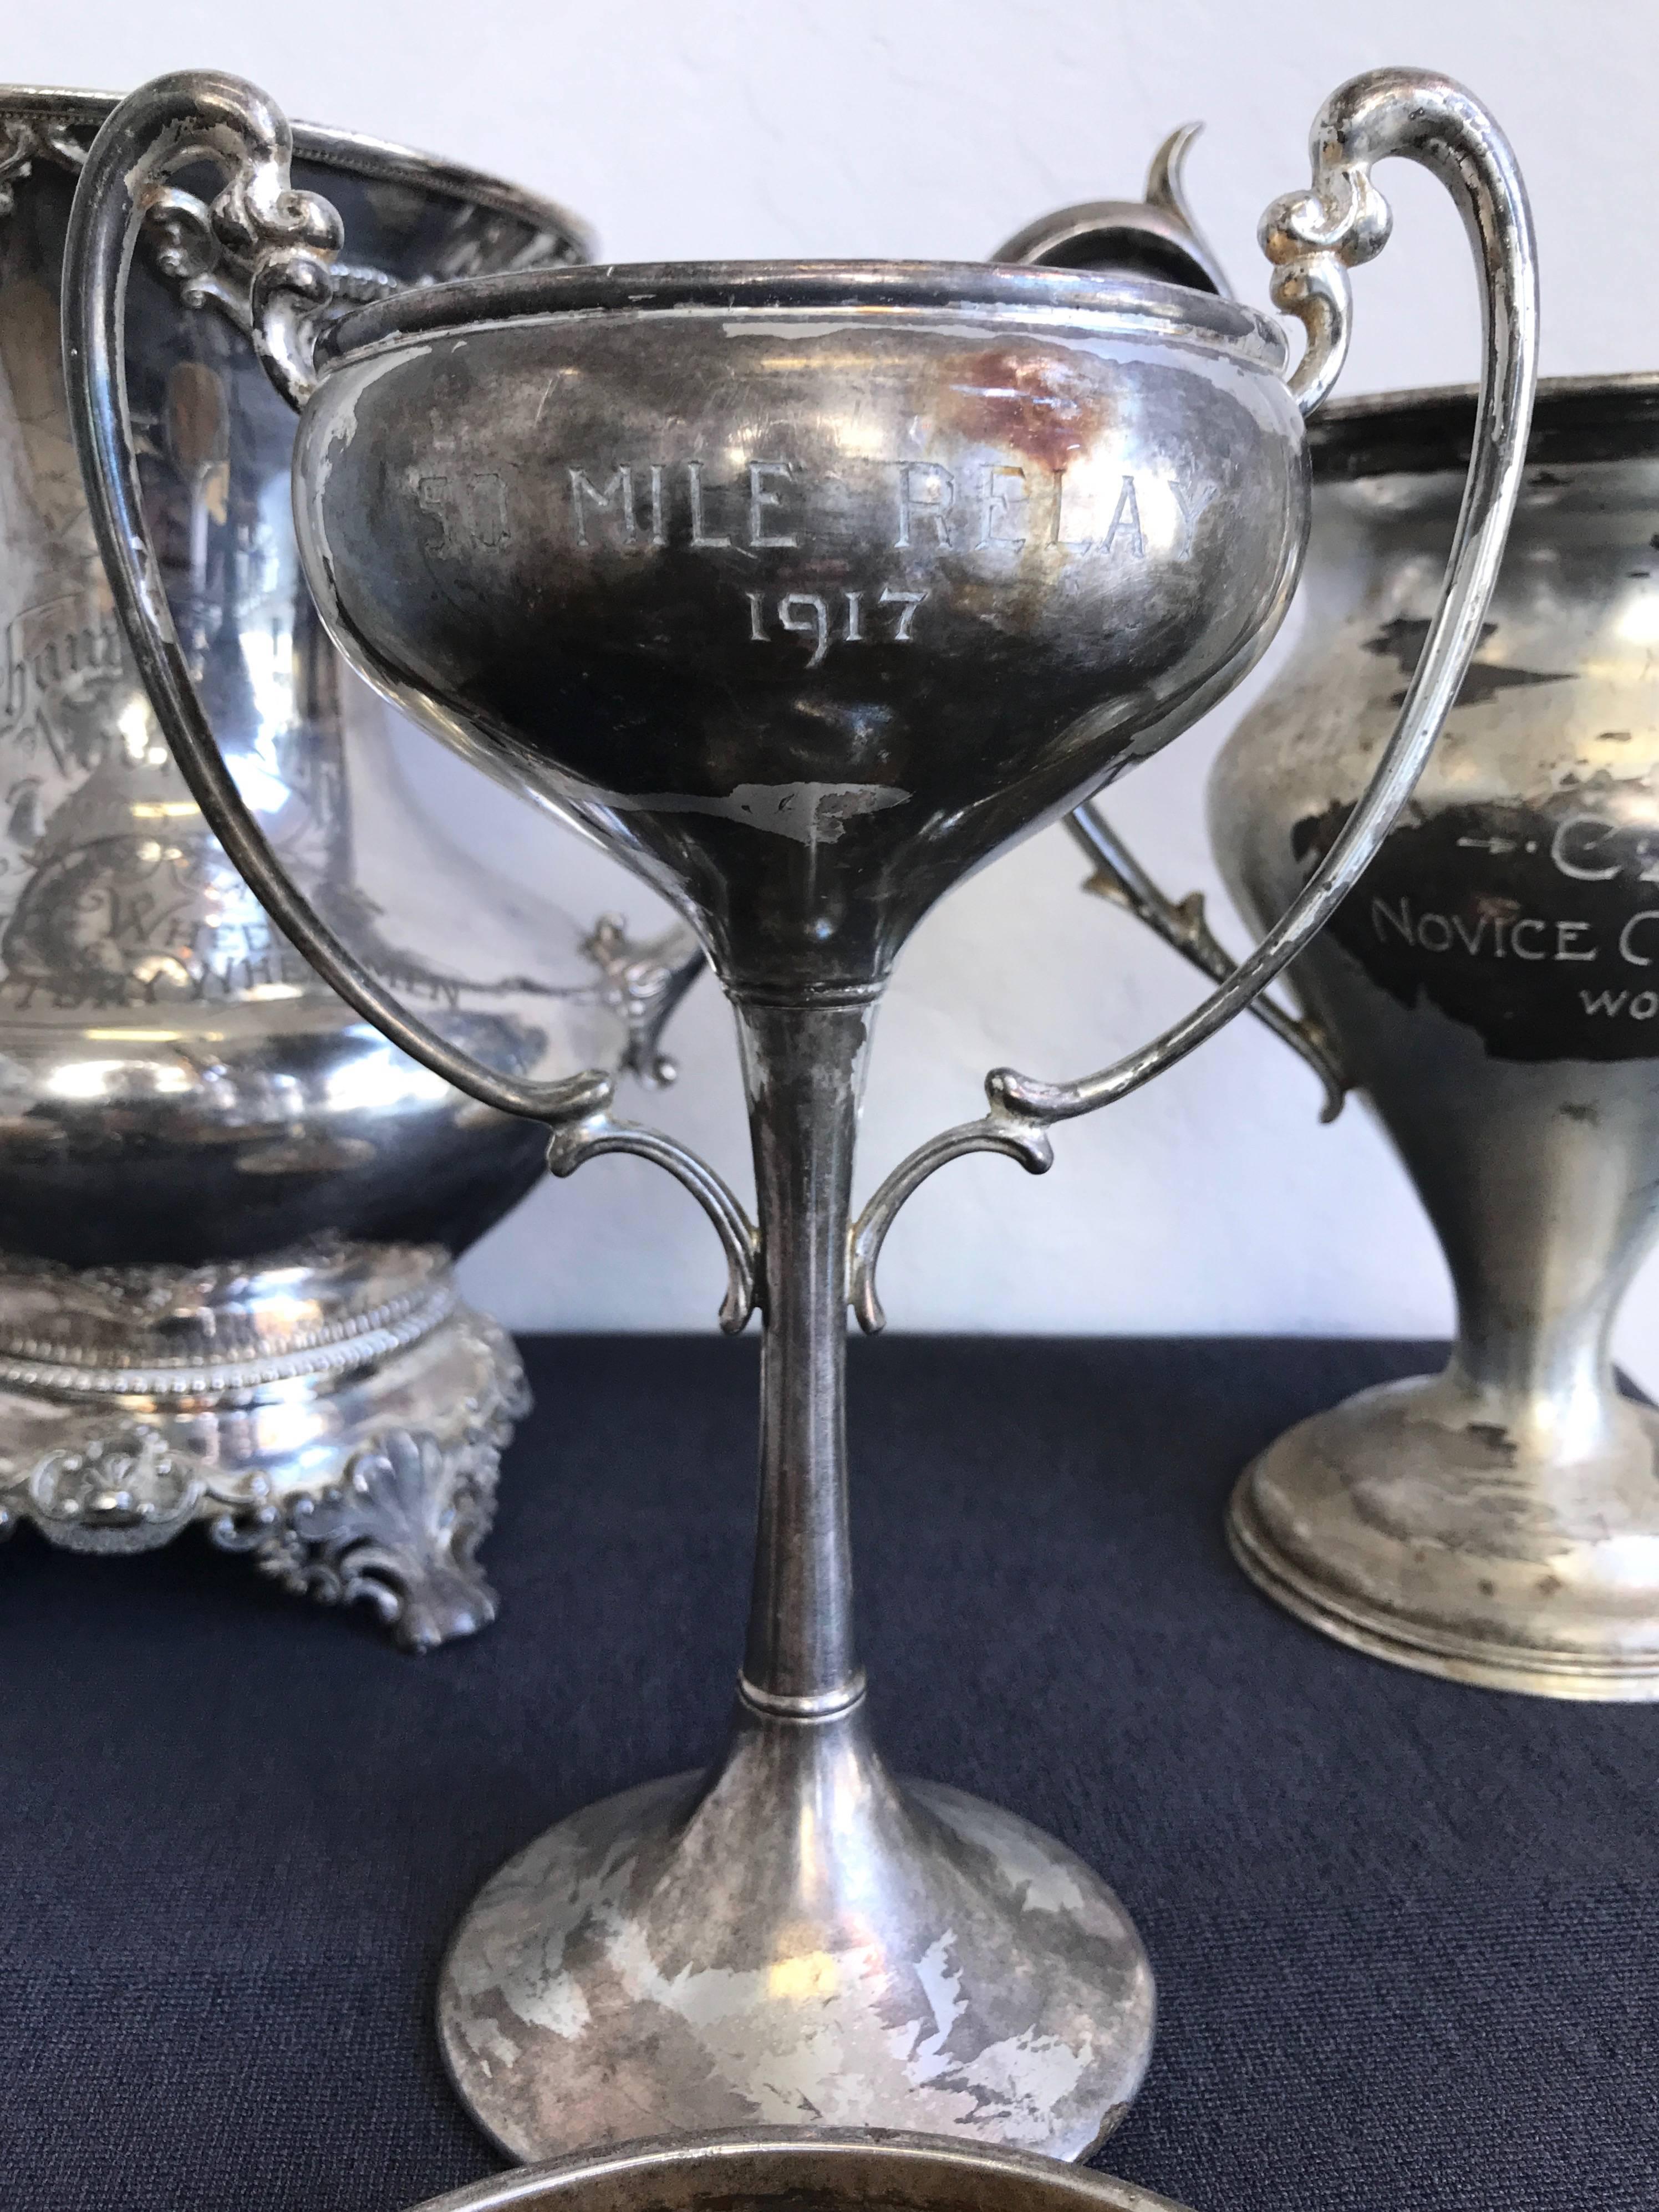 Group of Six Early 1900s California Bay Area Silverplate Cycling Trophies 7